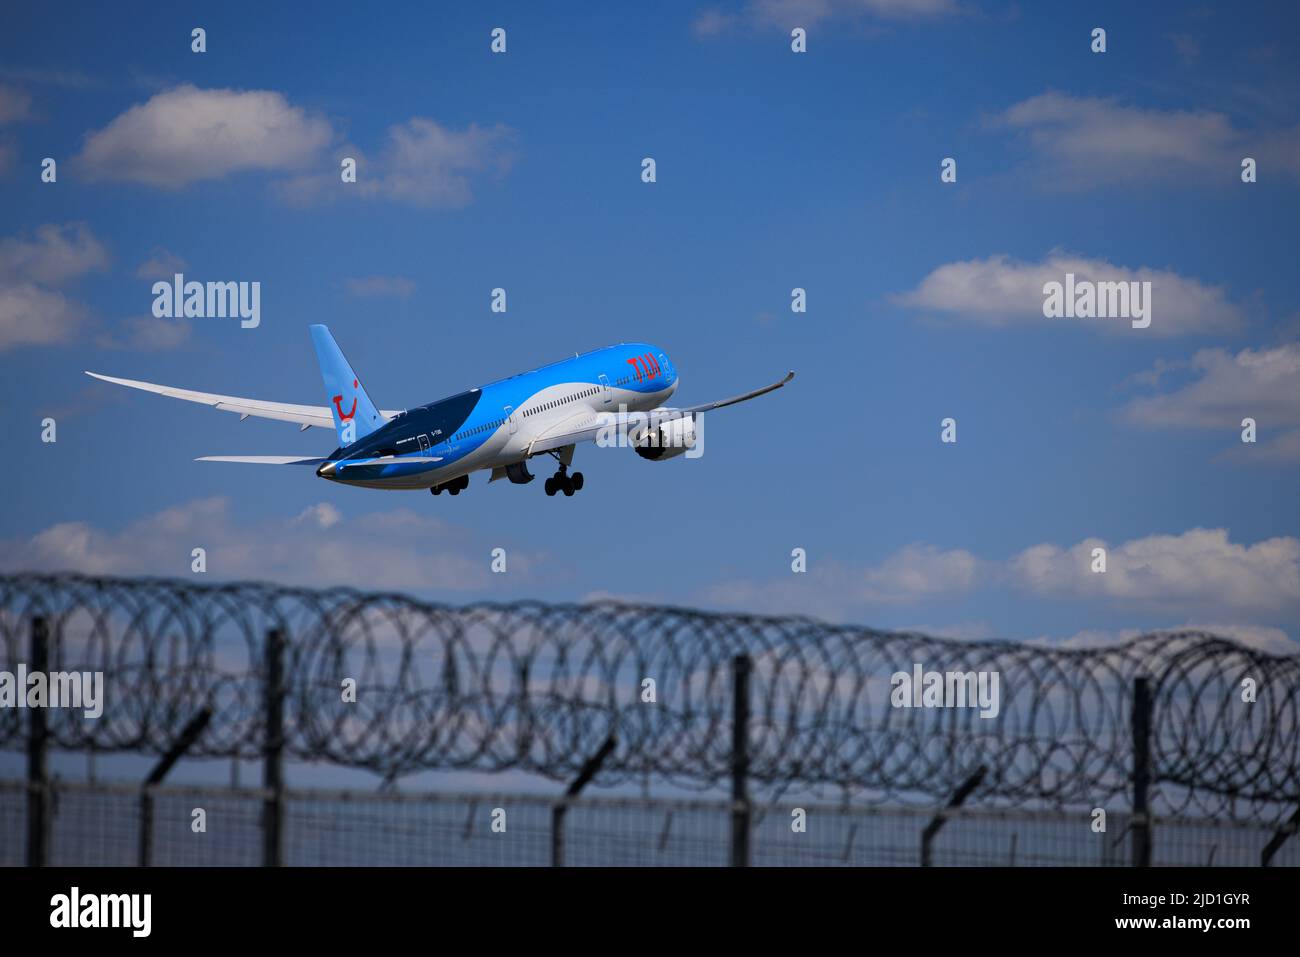 Security fence at Gatwick Airport as a Tui plane takes off on the runway Stock Photo